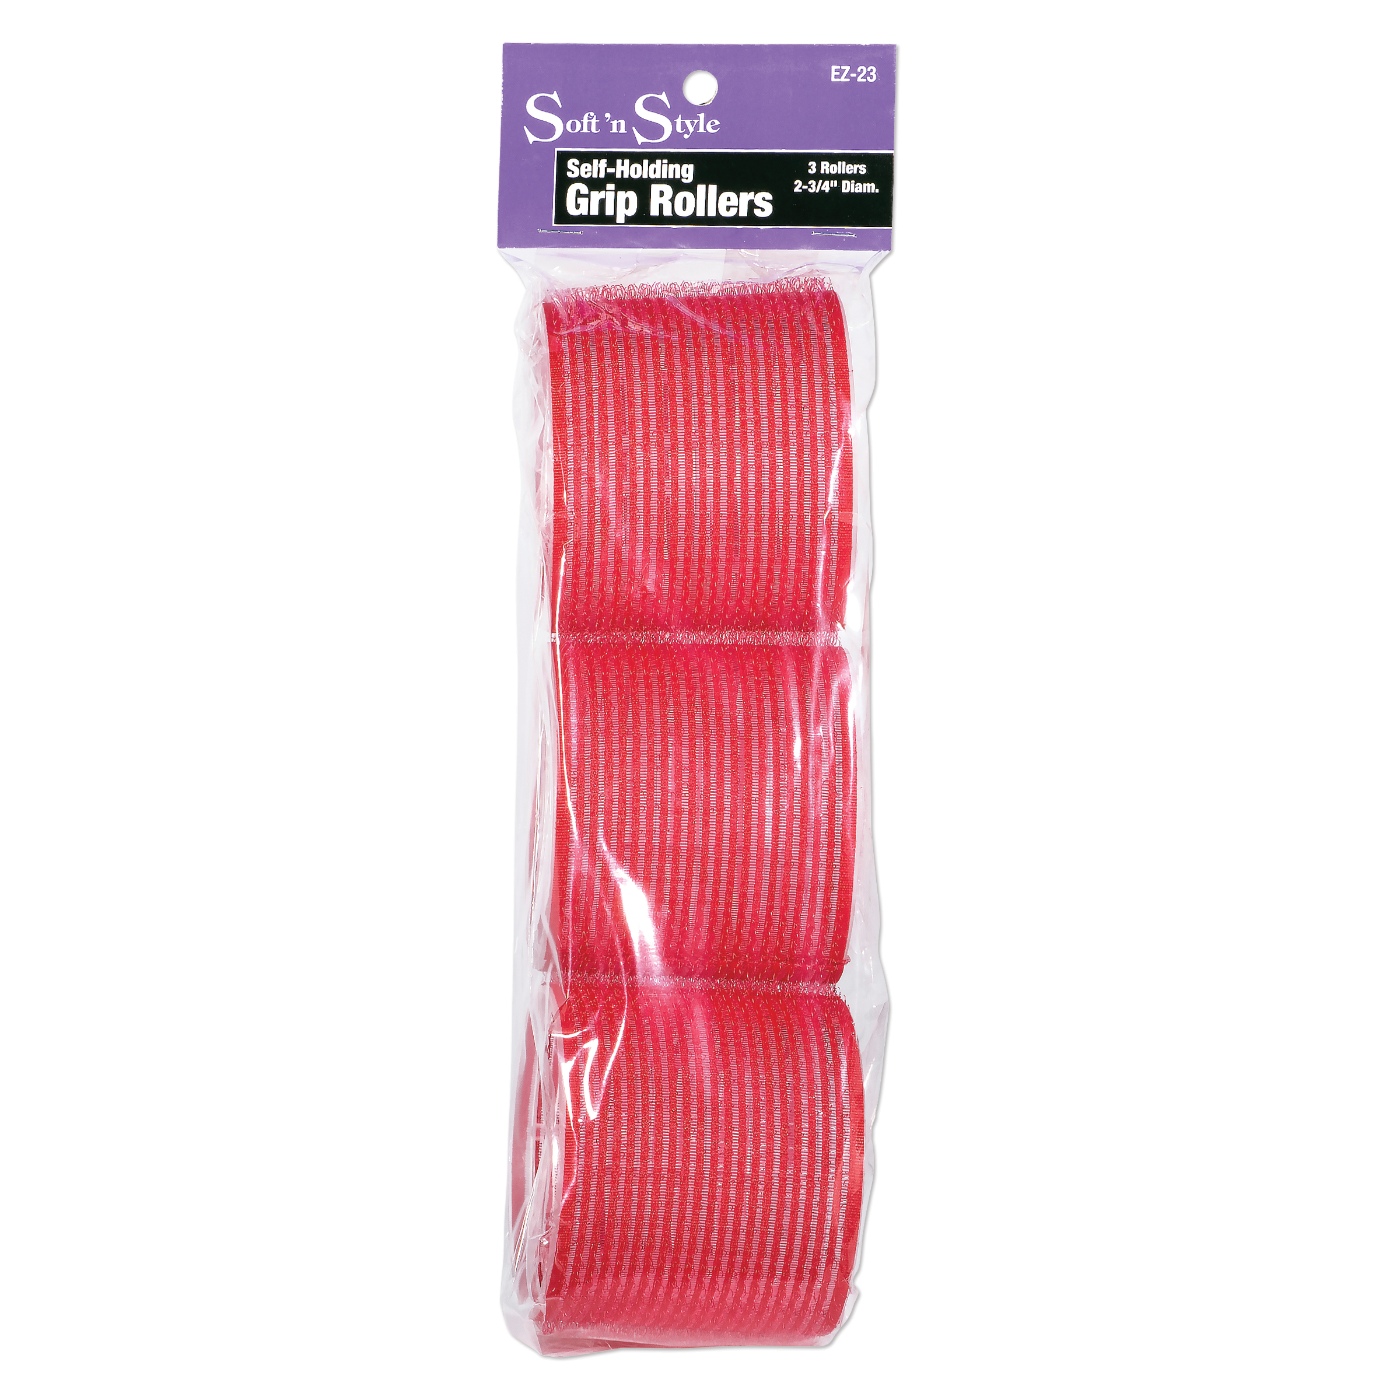 Self-Grip Rollers, Red/White - 2-3/4"